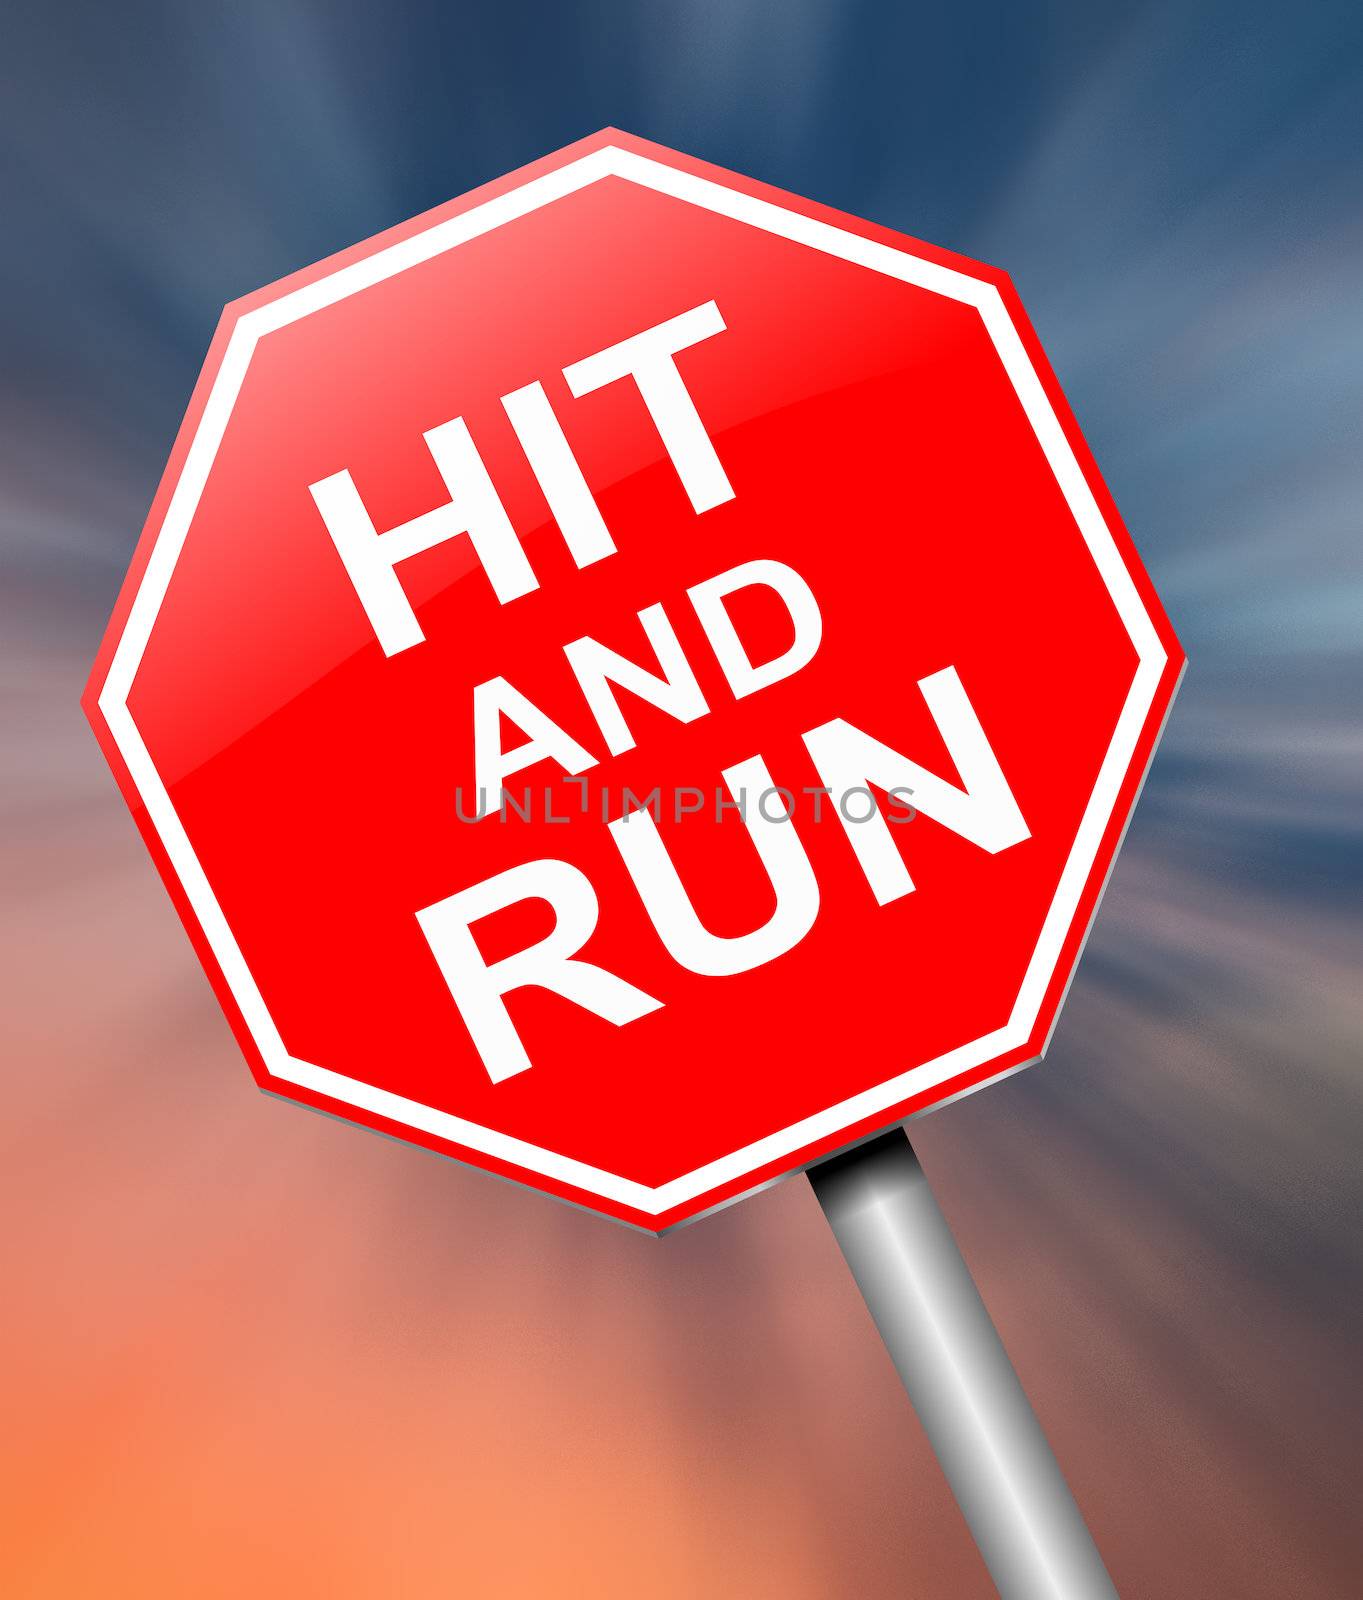 Illustration depicting a sign with a hit and run concept.